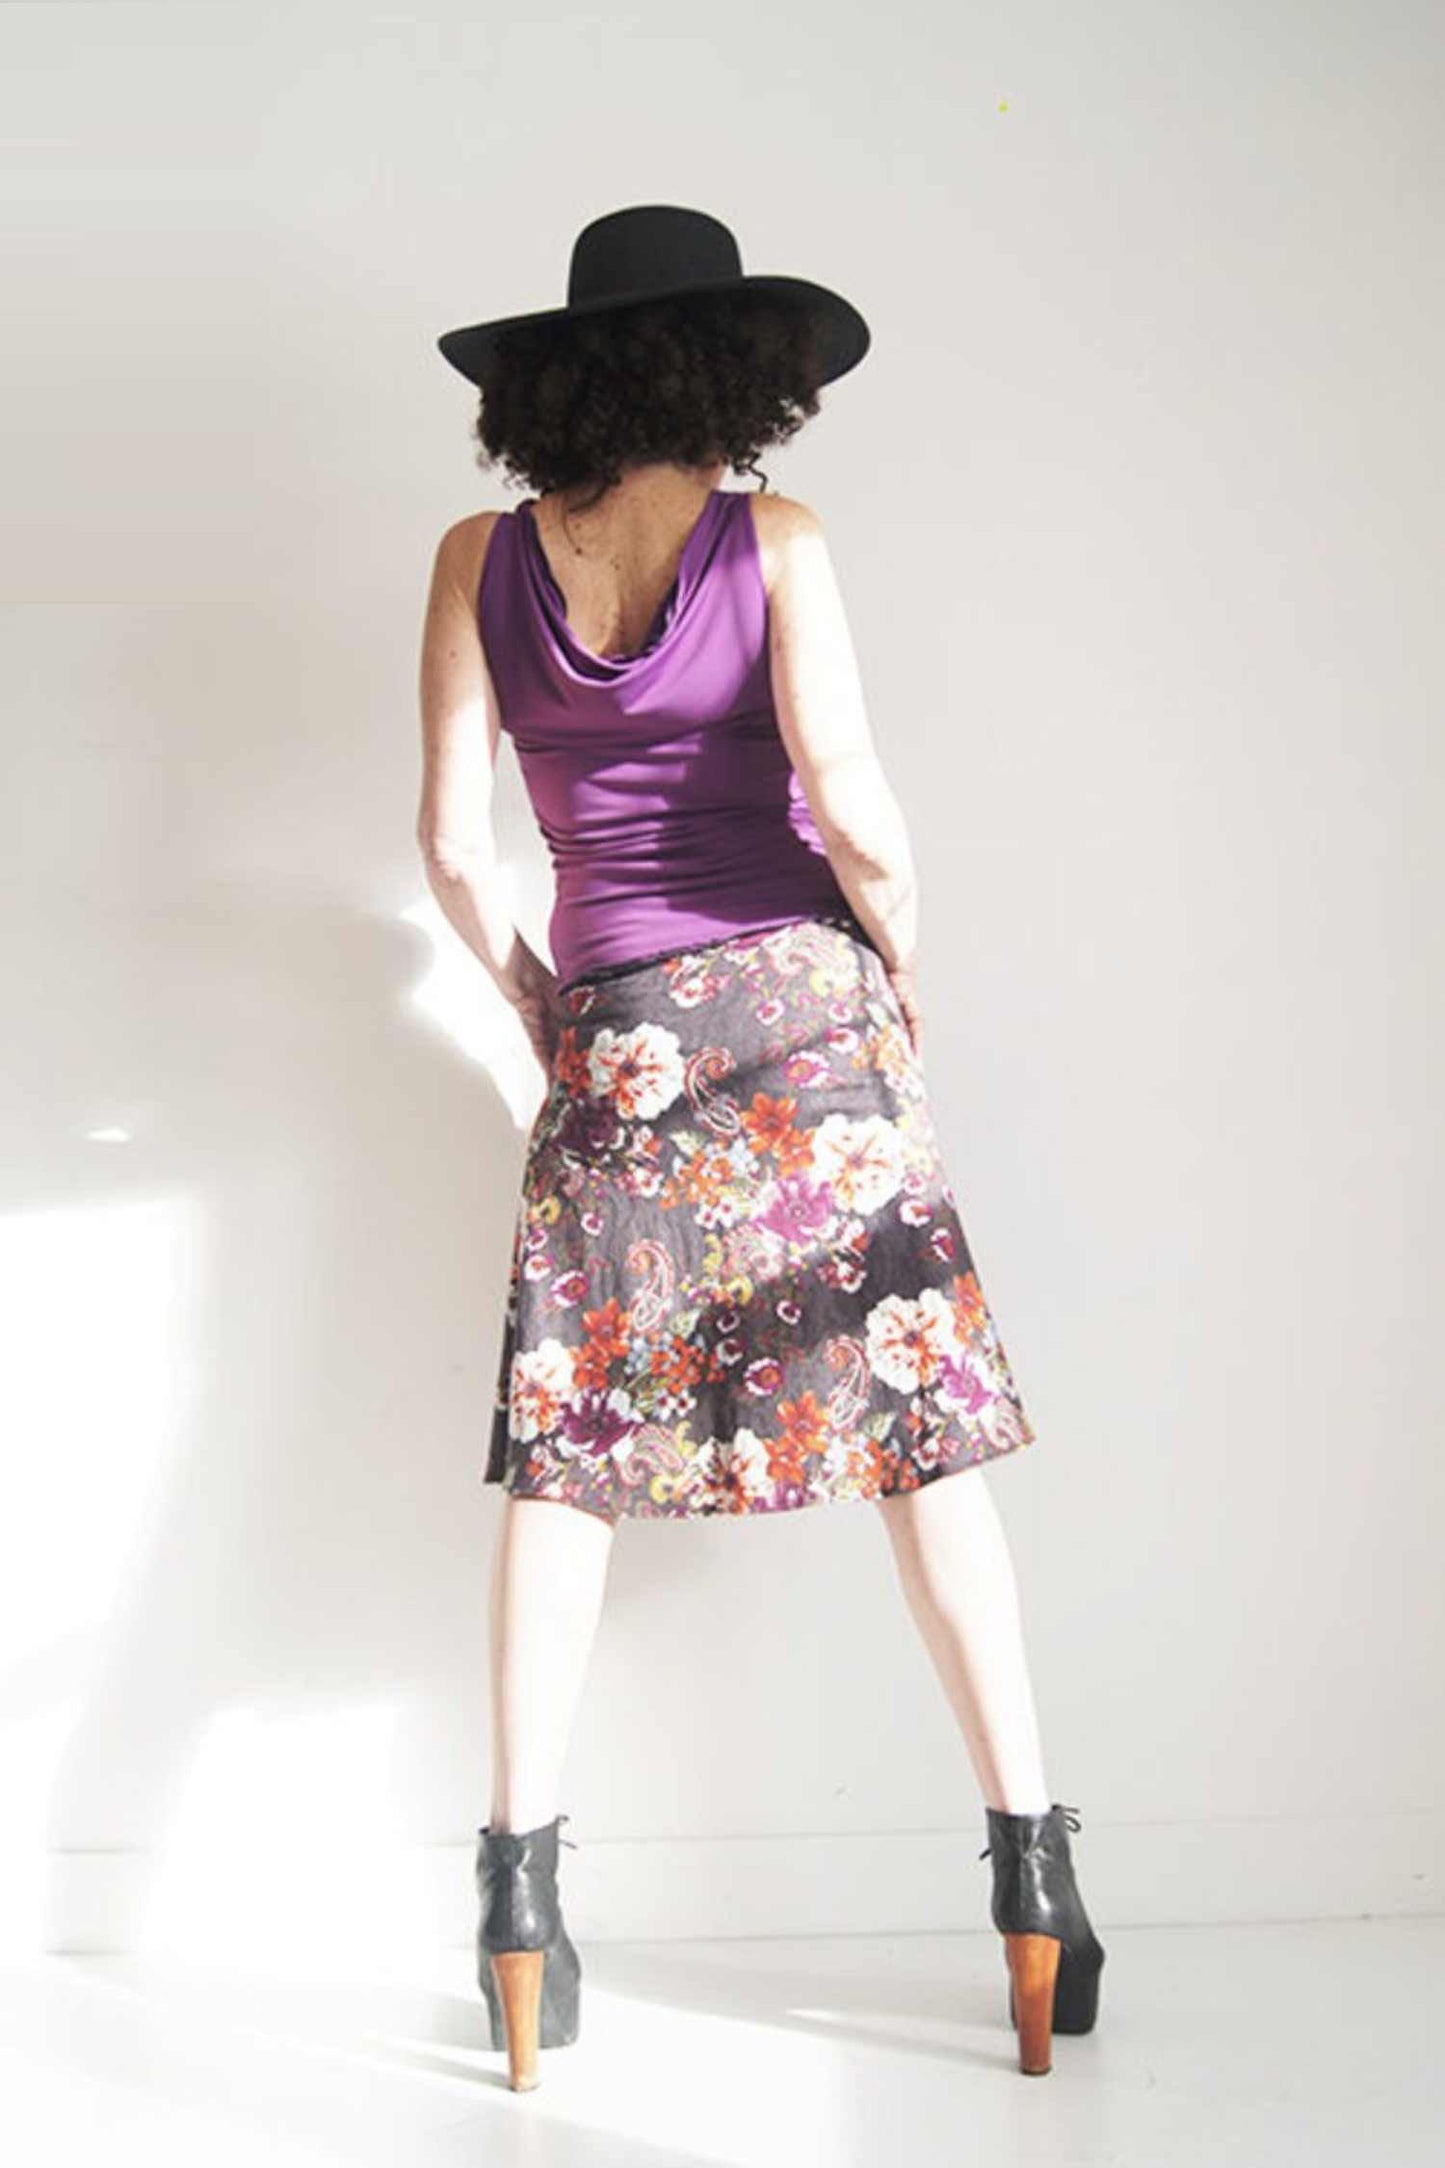 Bias Skirt by SI Design, Grey Floral, back view, A-line skirt, elastic waist, knee length, sizes S-L, made in Montreal